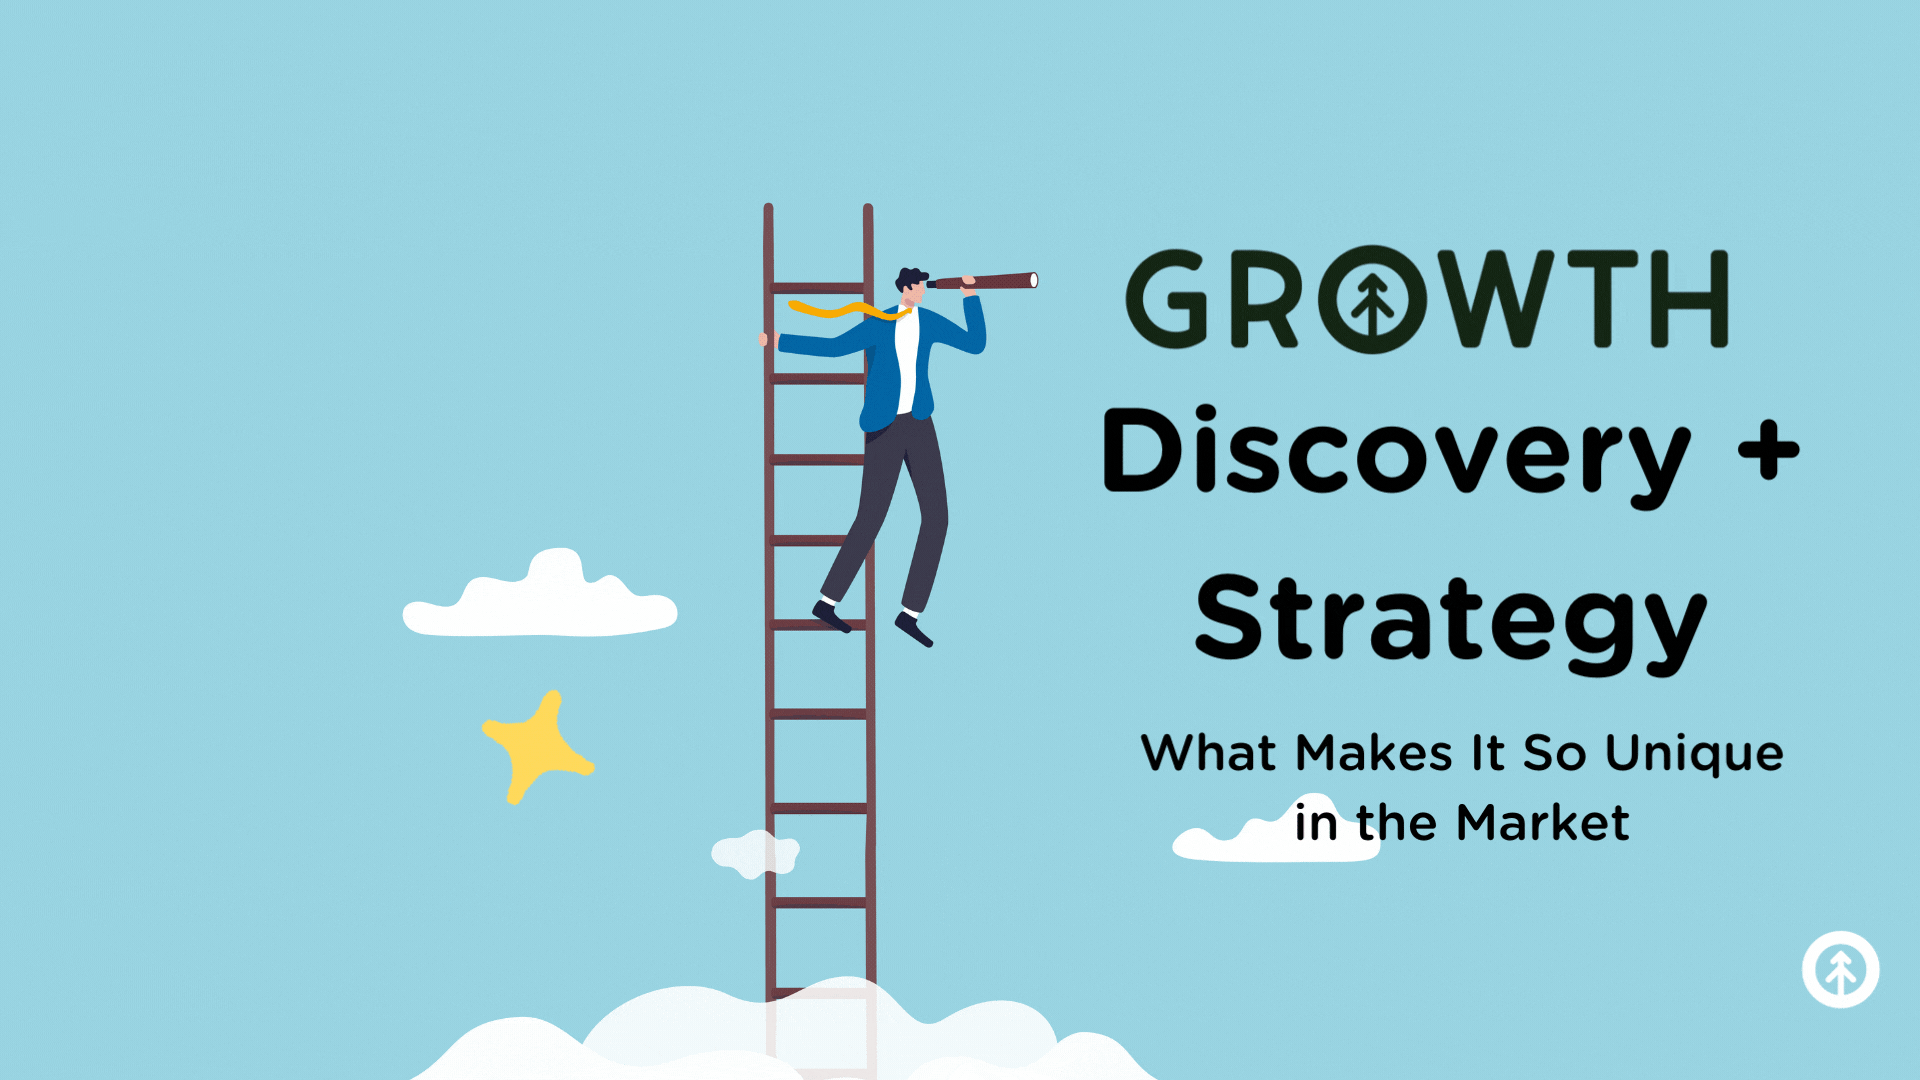 Growth's Discovery + Strategy Service: How It's Unique in the Market